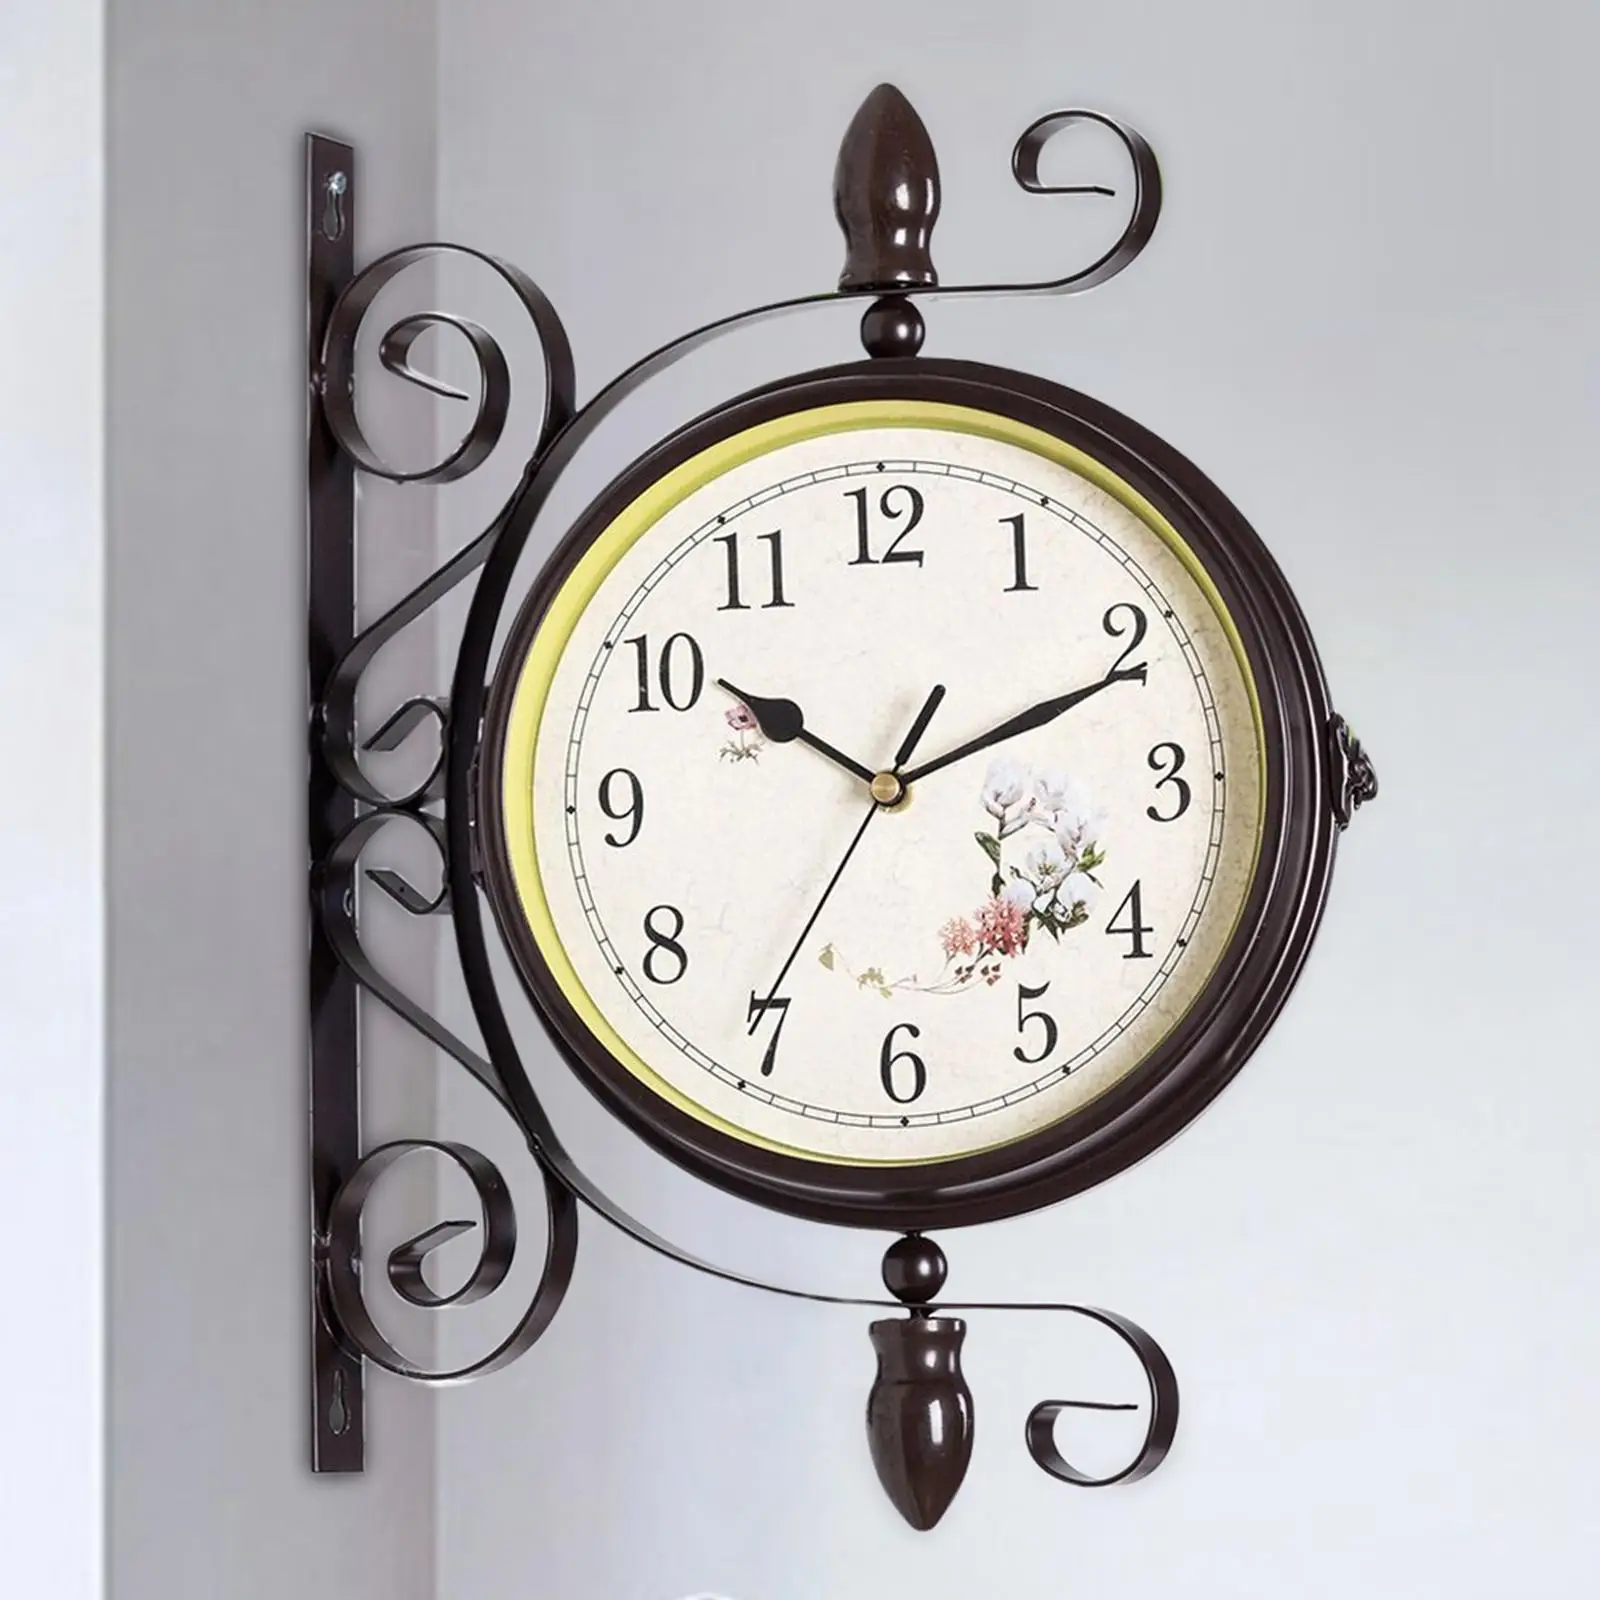 Retro Style Double Sided Wall Clock Mute Decorative Battery Powered Wall Mount Clocks for Living Room Patio Garden Bedroom Home